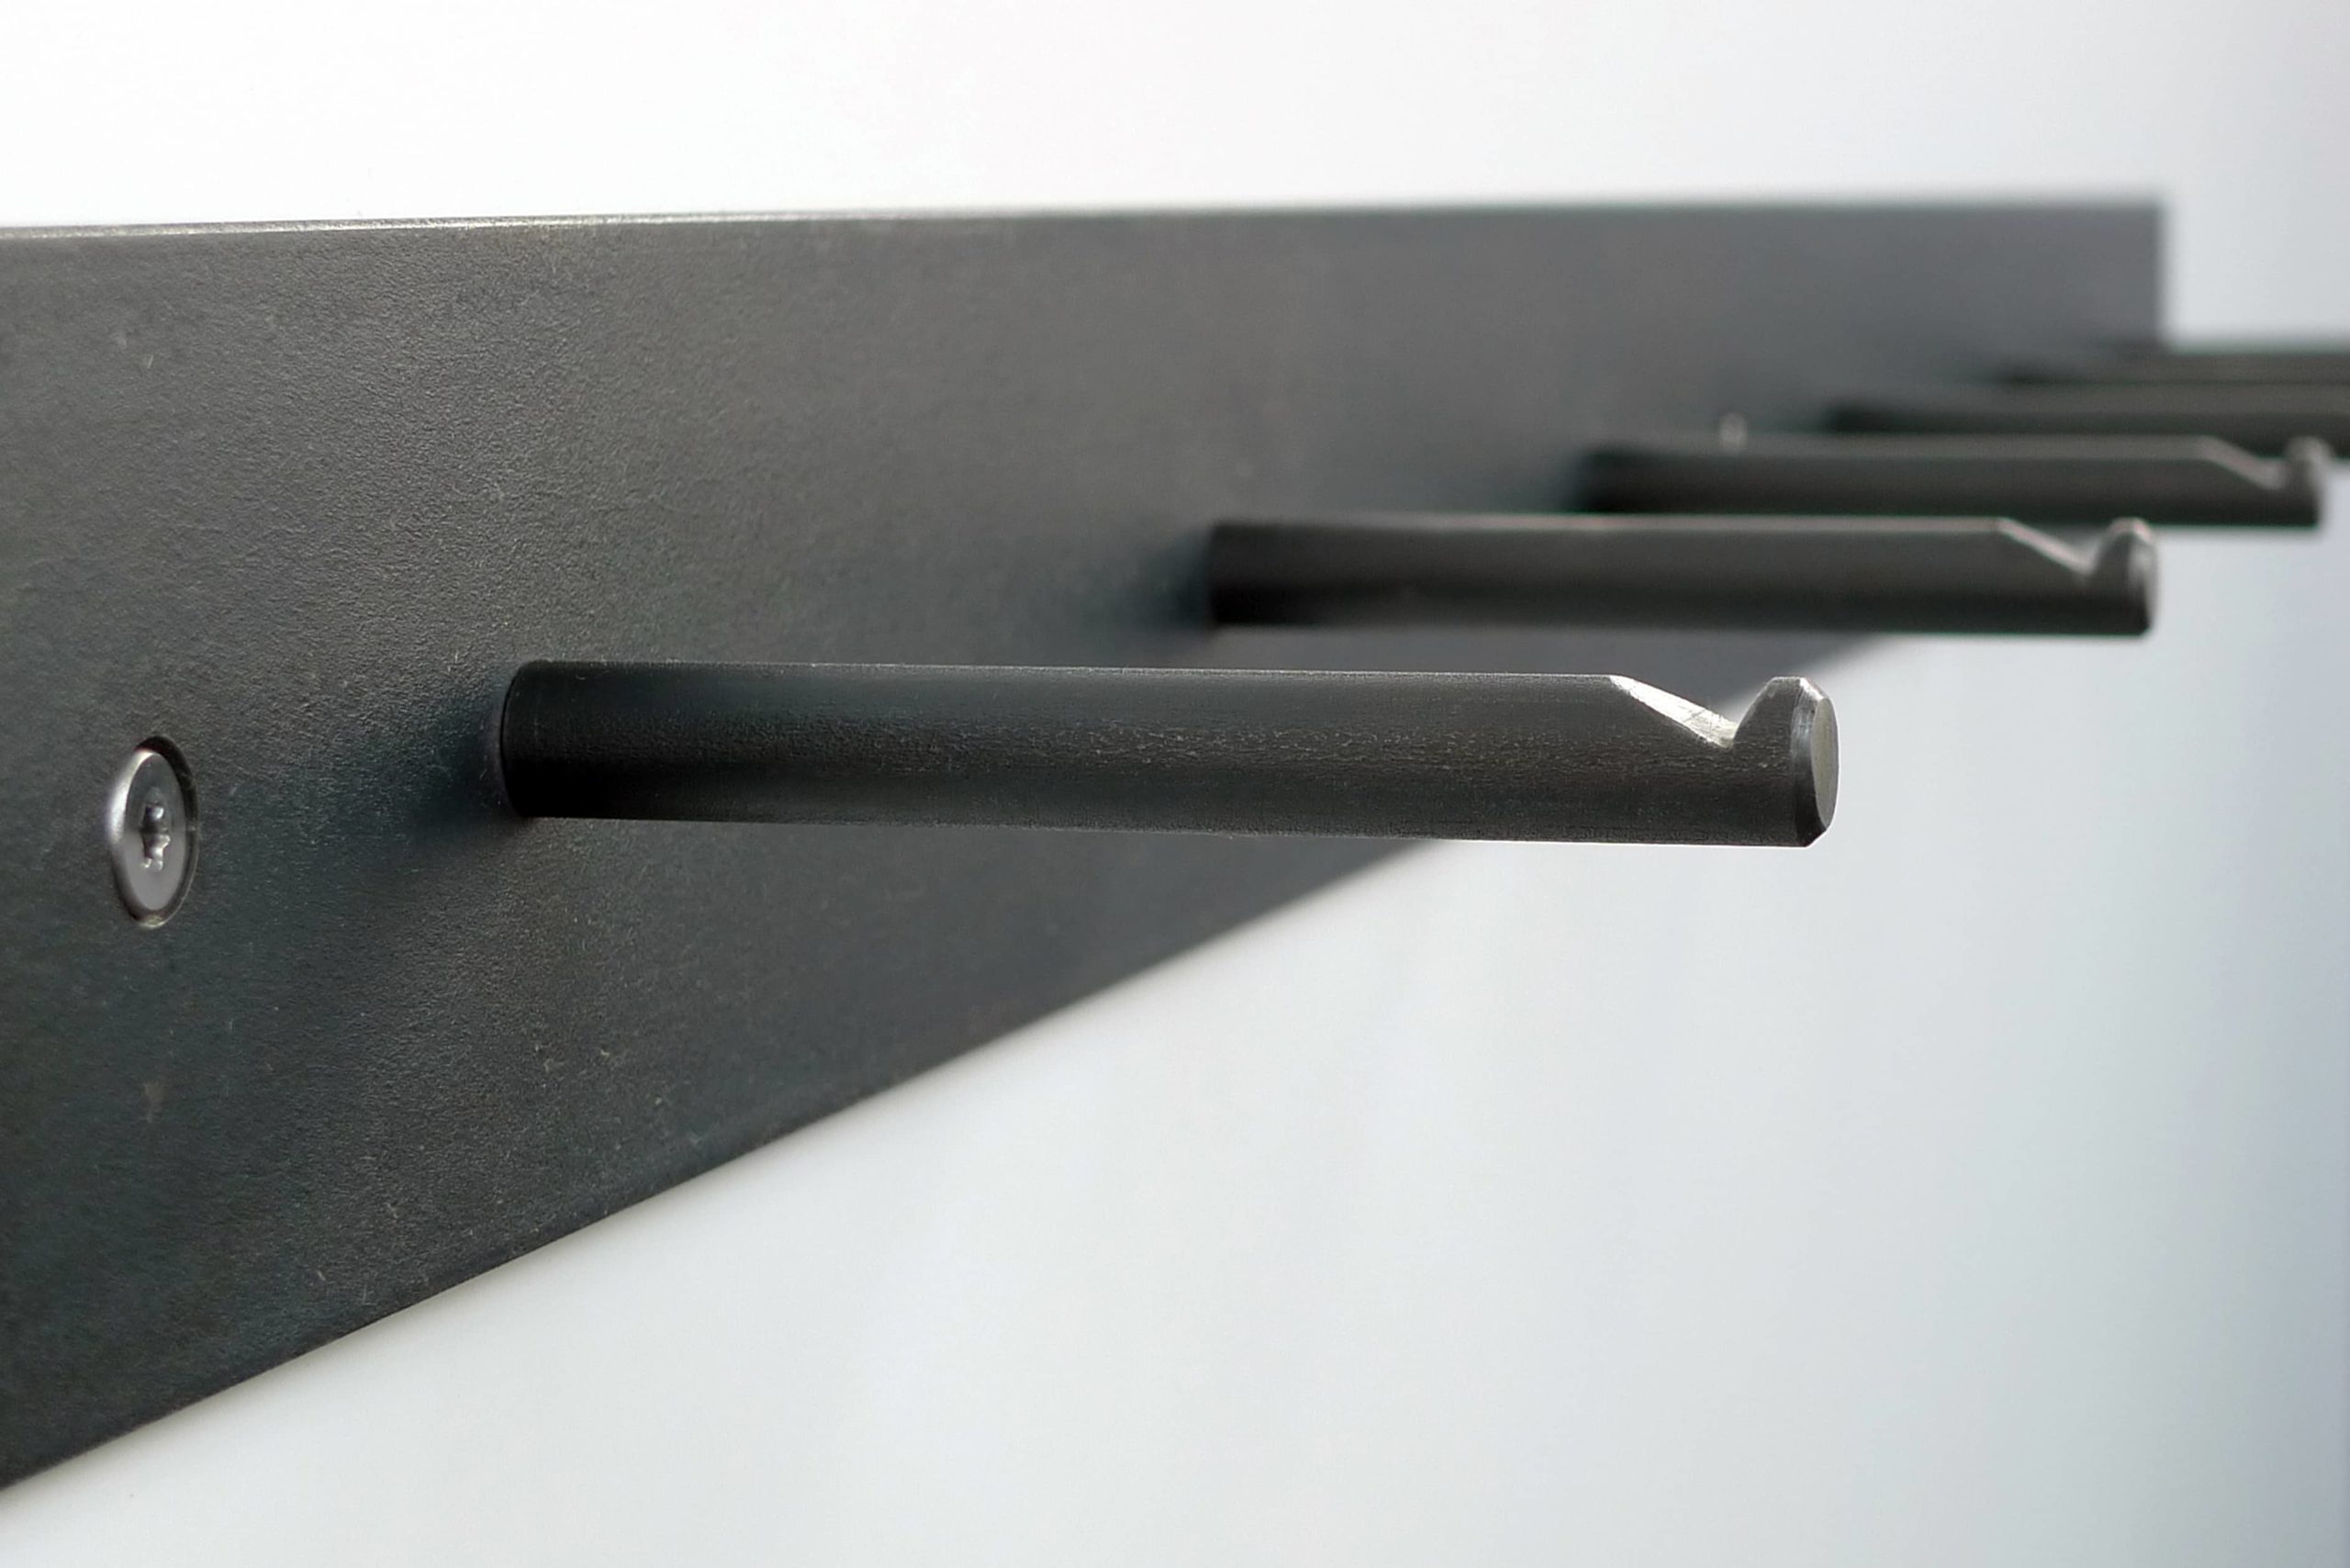 Hellogoodbye coat rack is made of a flat piece of crude steel plus six round hooks with notches to prevent clothes or coat hangers from sliding off.